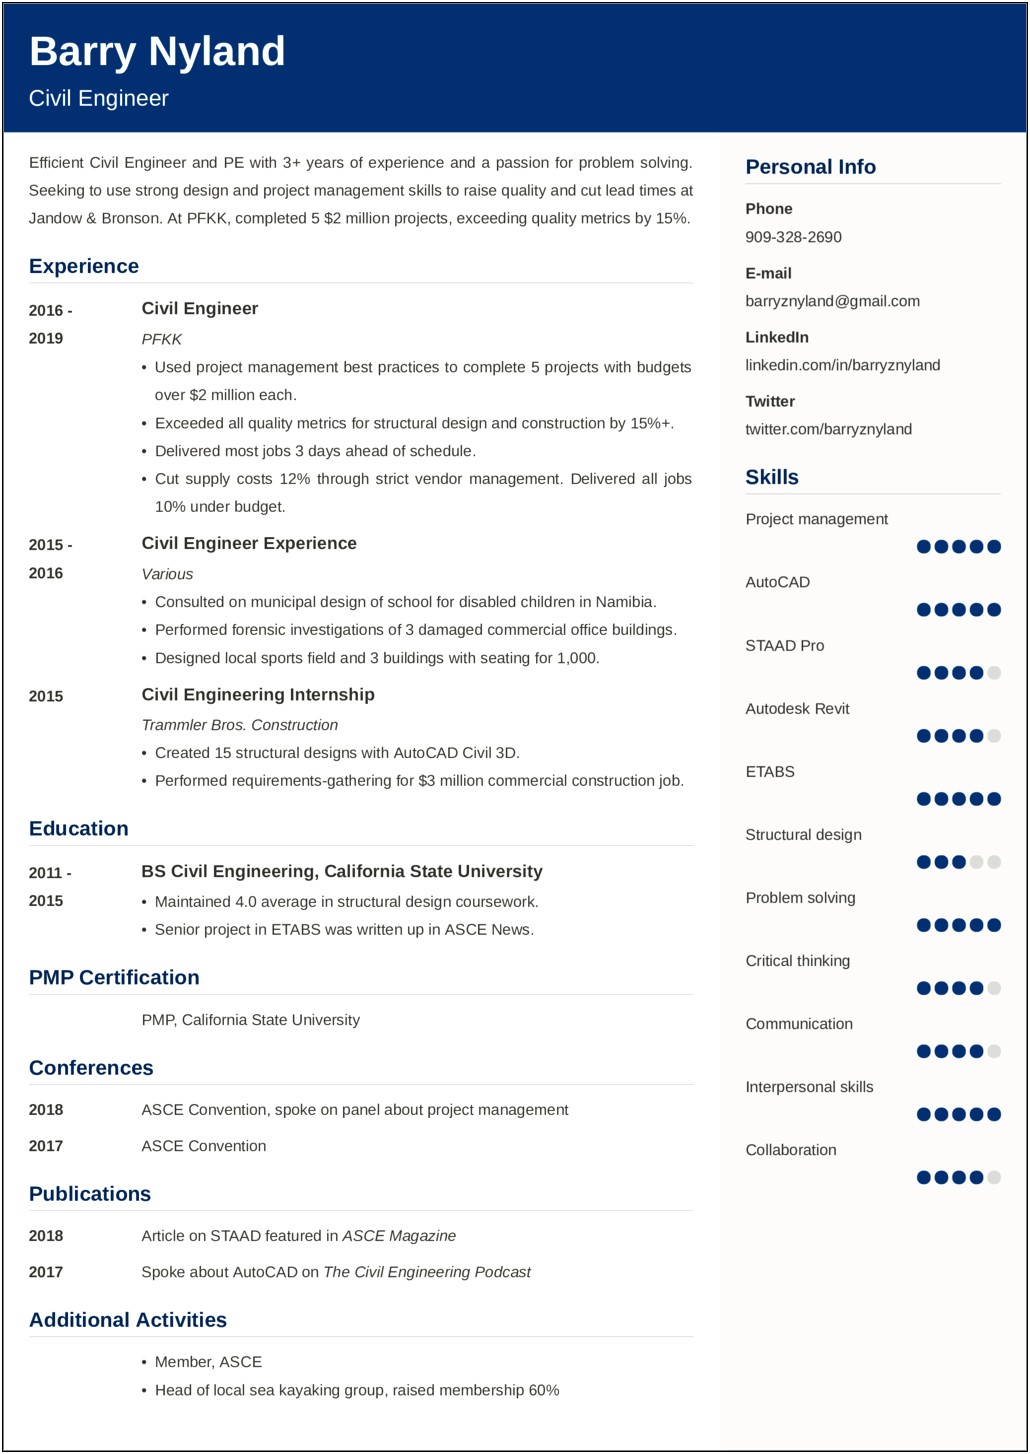 Best Skills To Acquire For Civil Engineer Resume